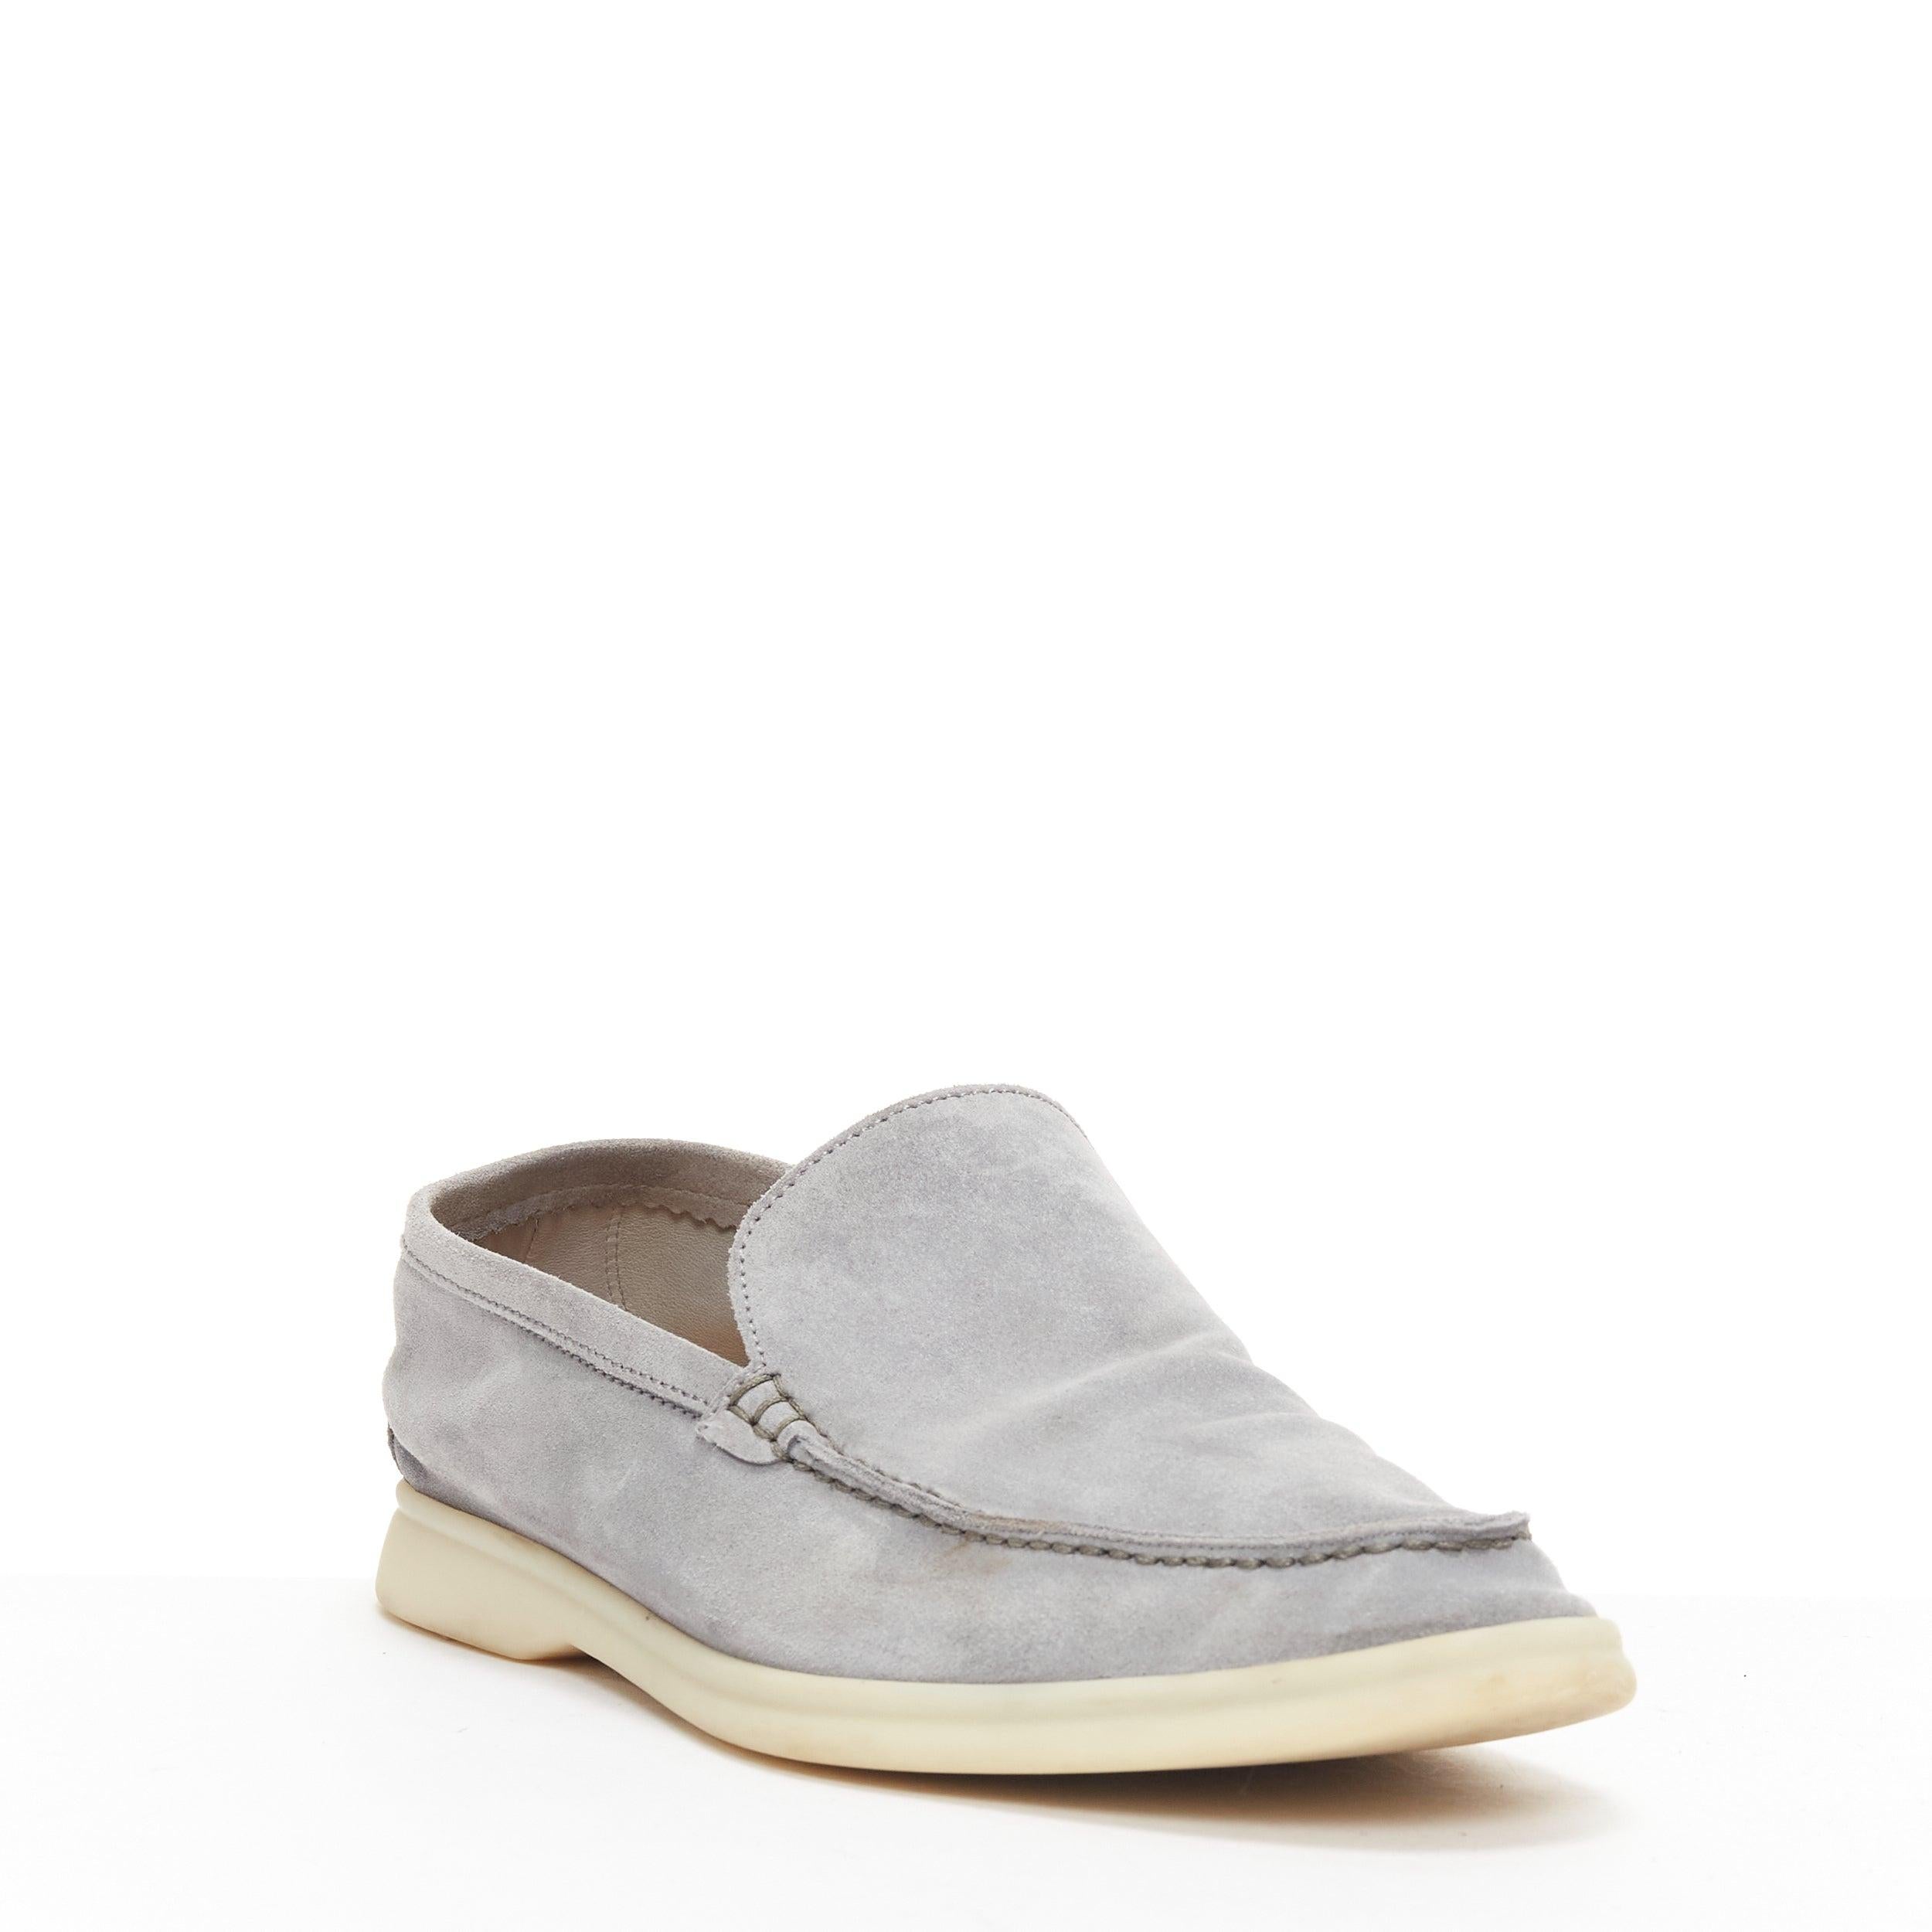 LORO PIANA Summer Walk grey suede cream rubber midsole loafers EU41
Reference: YIKK/A00035
Brand: Loro Piana
Model: Summer Walk
Material: Suede
Color: Grey, Cream
Pattern: Solid
Closure: Slip On
Lining: Nude Leather
Extra Details: Logo back.
Made